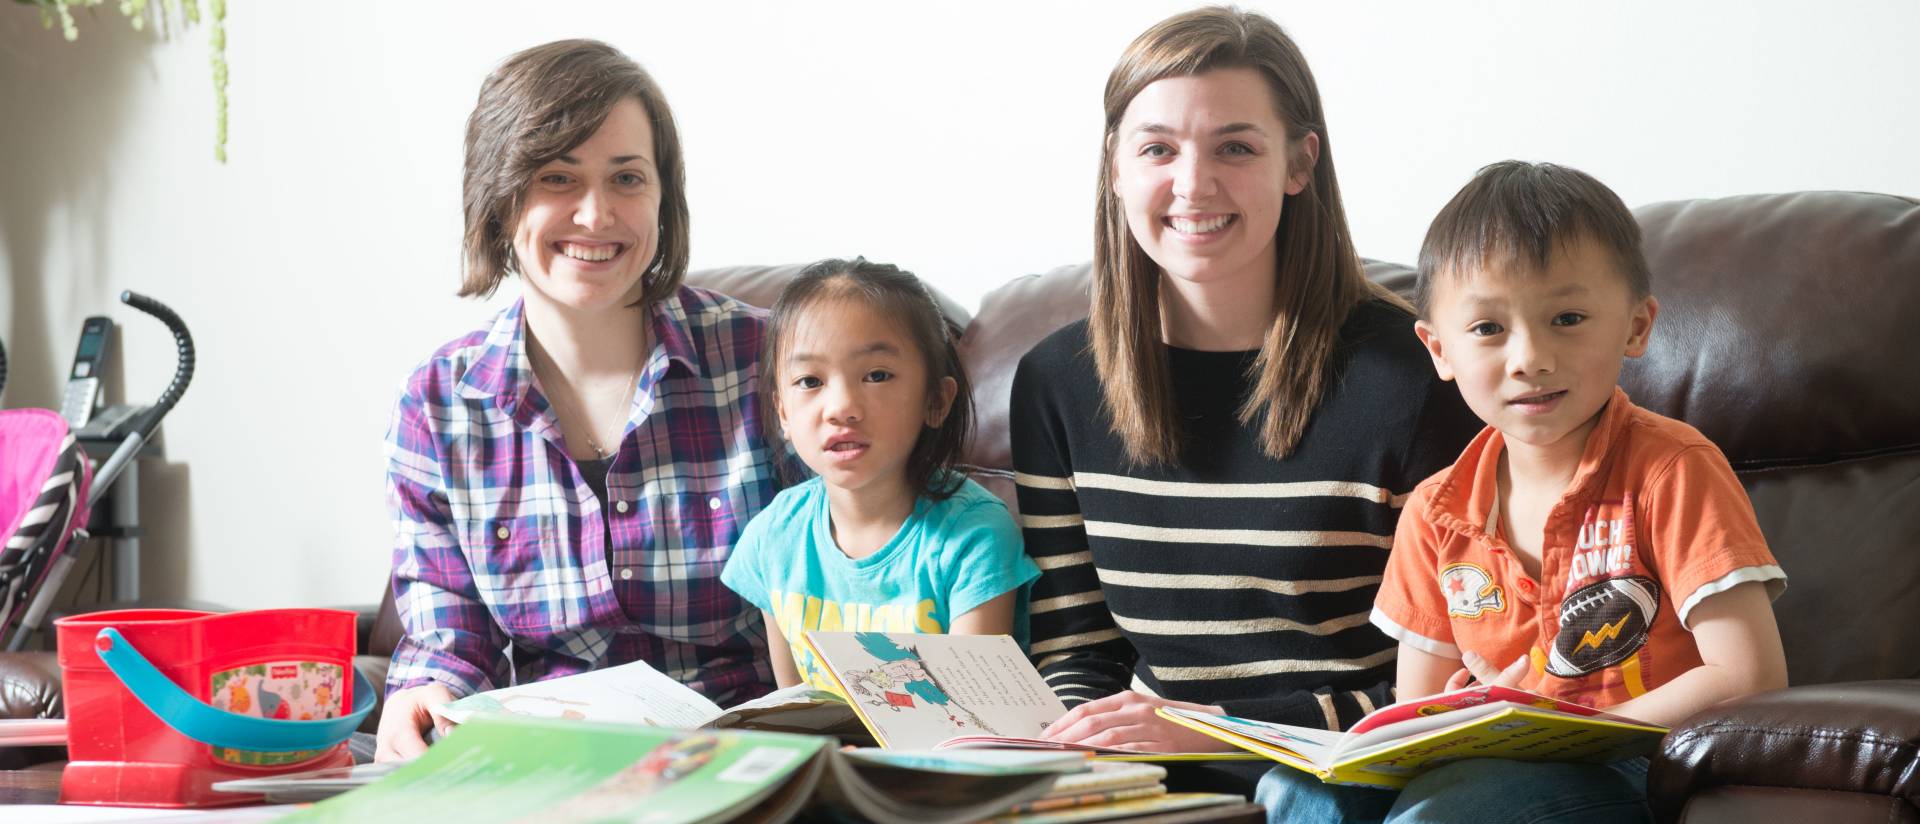 UW-Eau Claire students Jeannie LaFavor, left, and Shannon Harris, right, spend time with their reading partners.